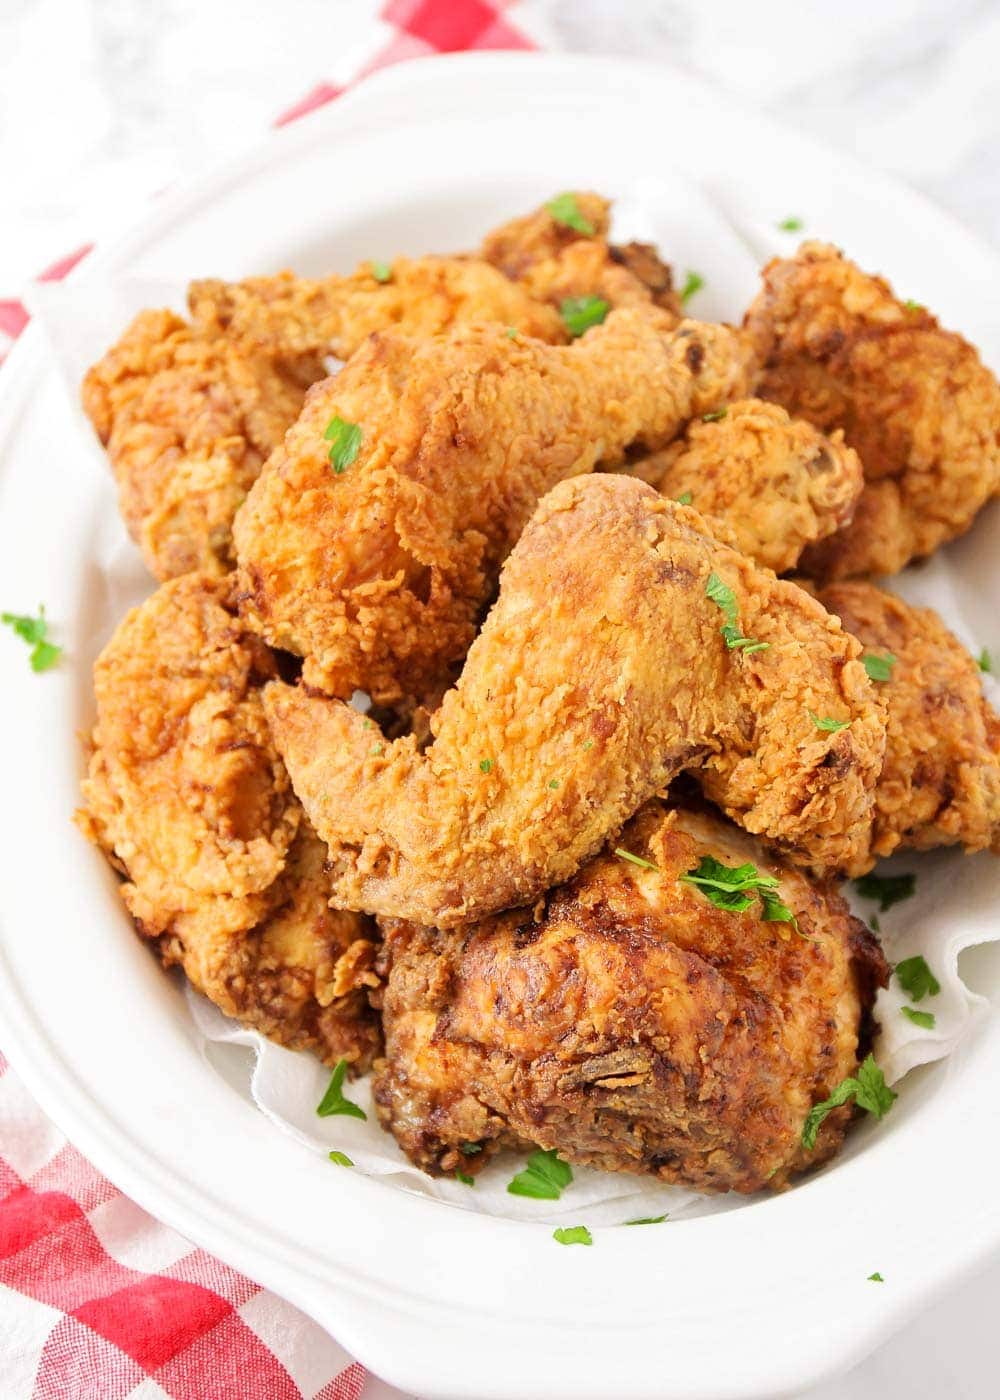 Serve candied sweet potatoes with fried chicken.